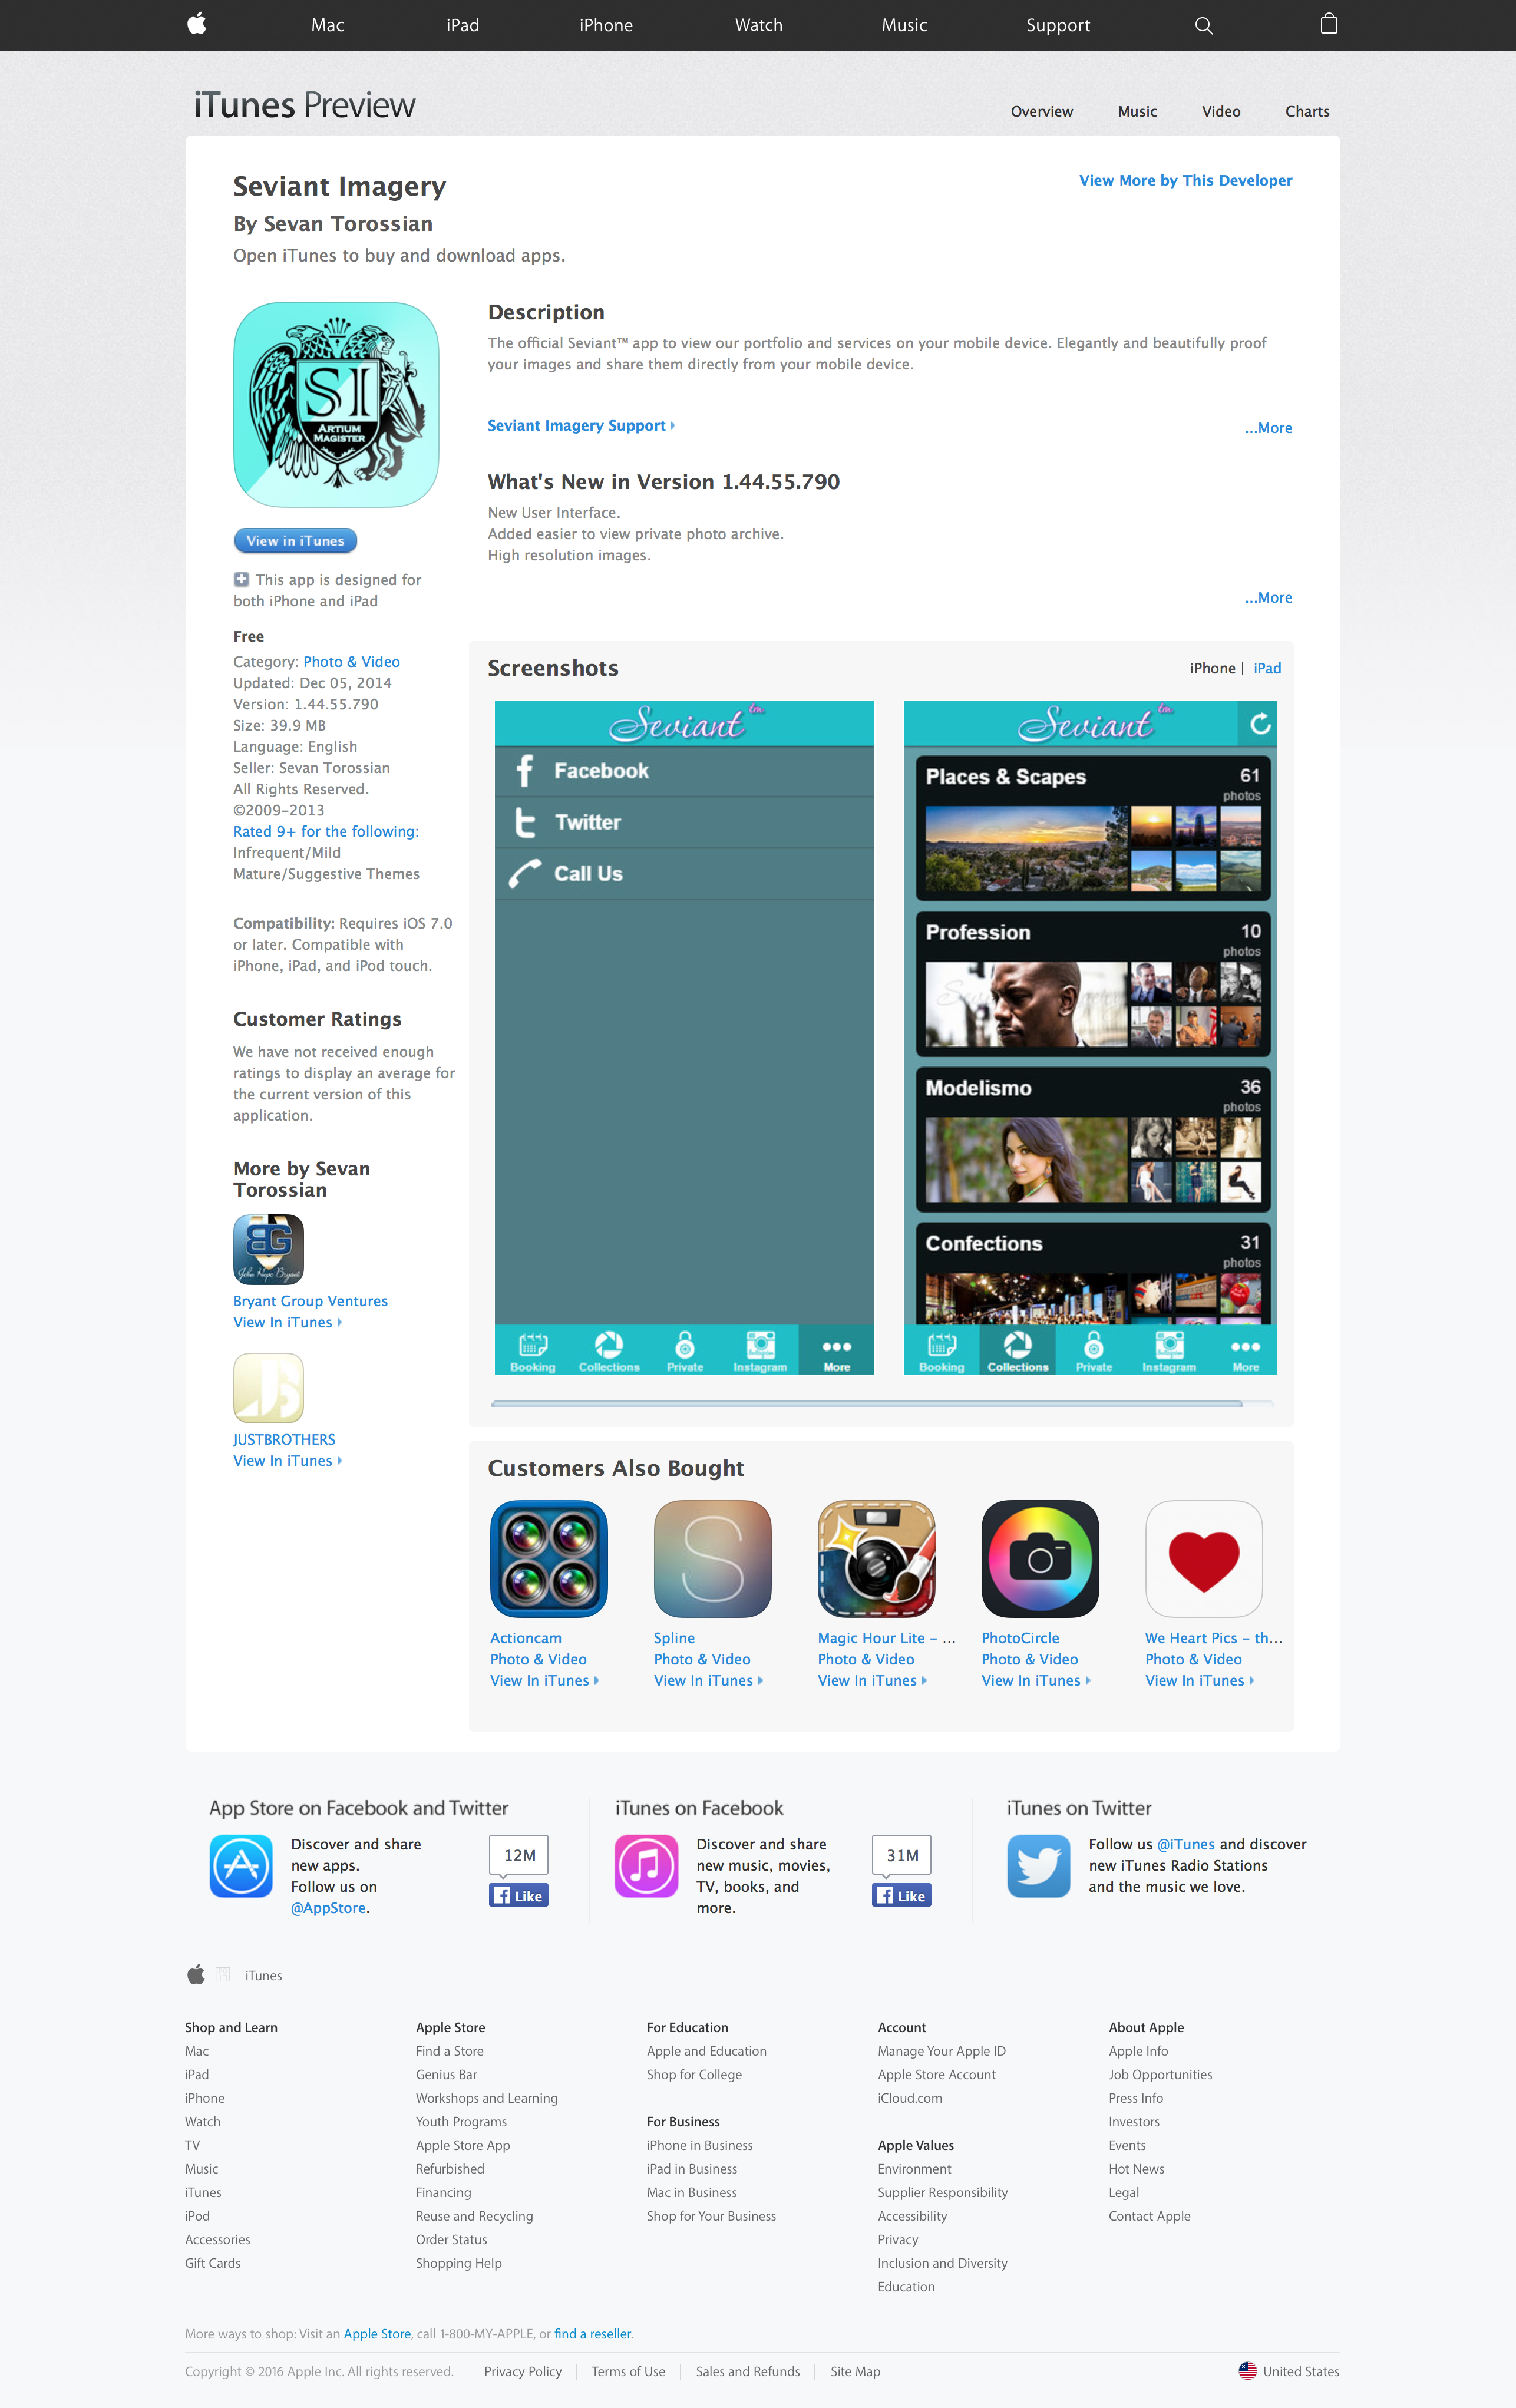 Seviant Studios iOS and Android App Design and Developed By Seviant Studios Apple App Store Screenshot